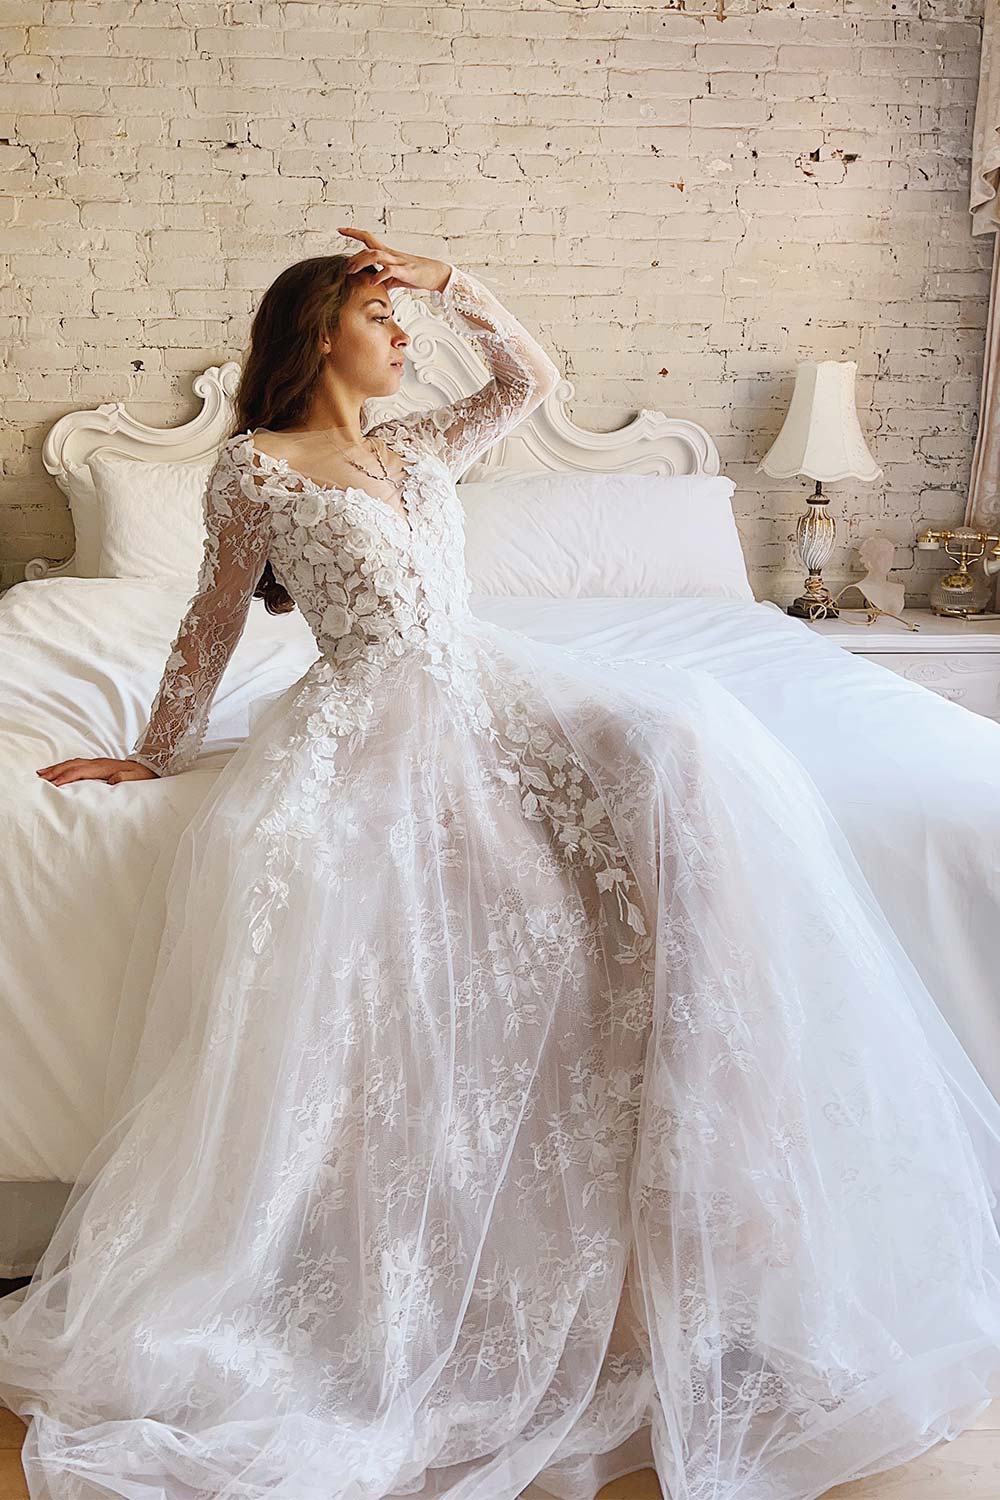 V-neck Long Sleeves Backless Ivory Chiffon Wedding Dress with Lace - June  Bridals